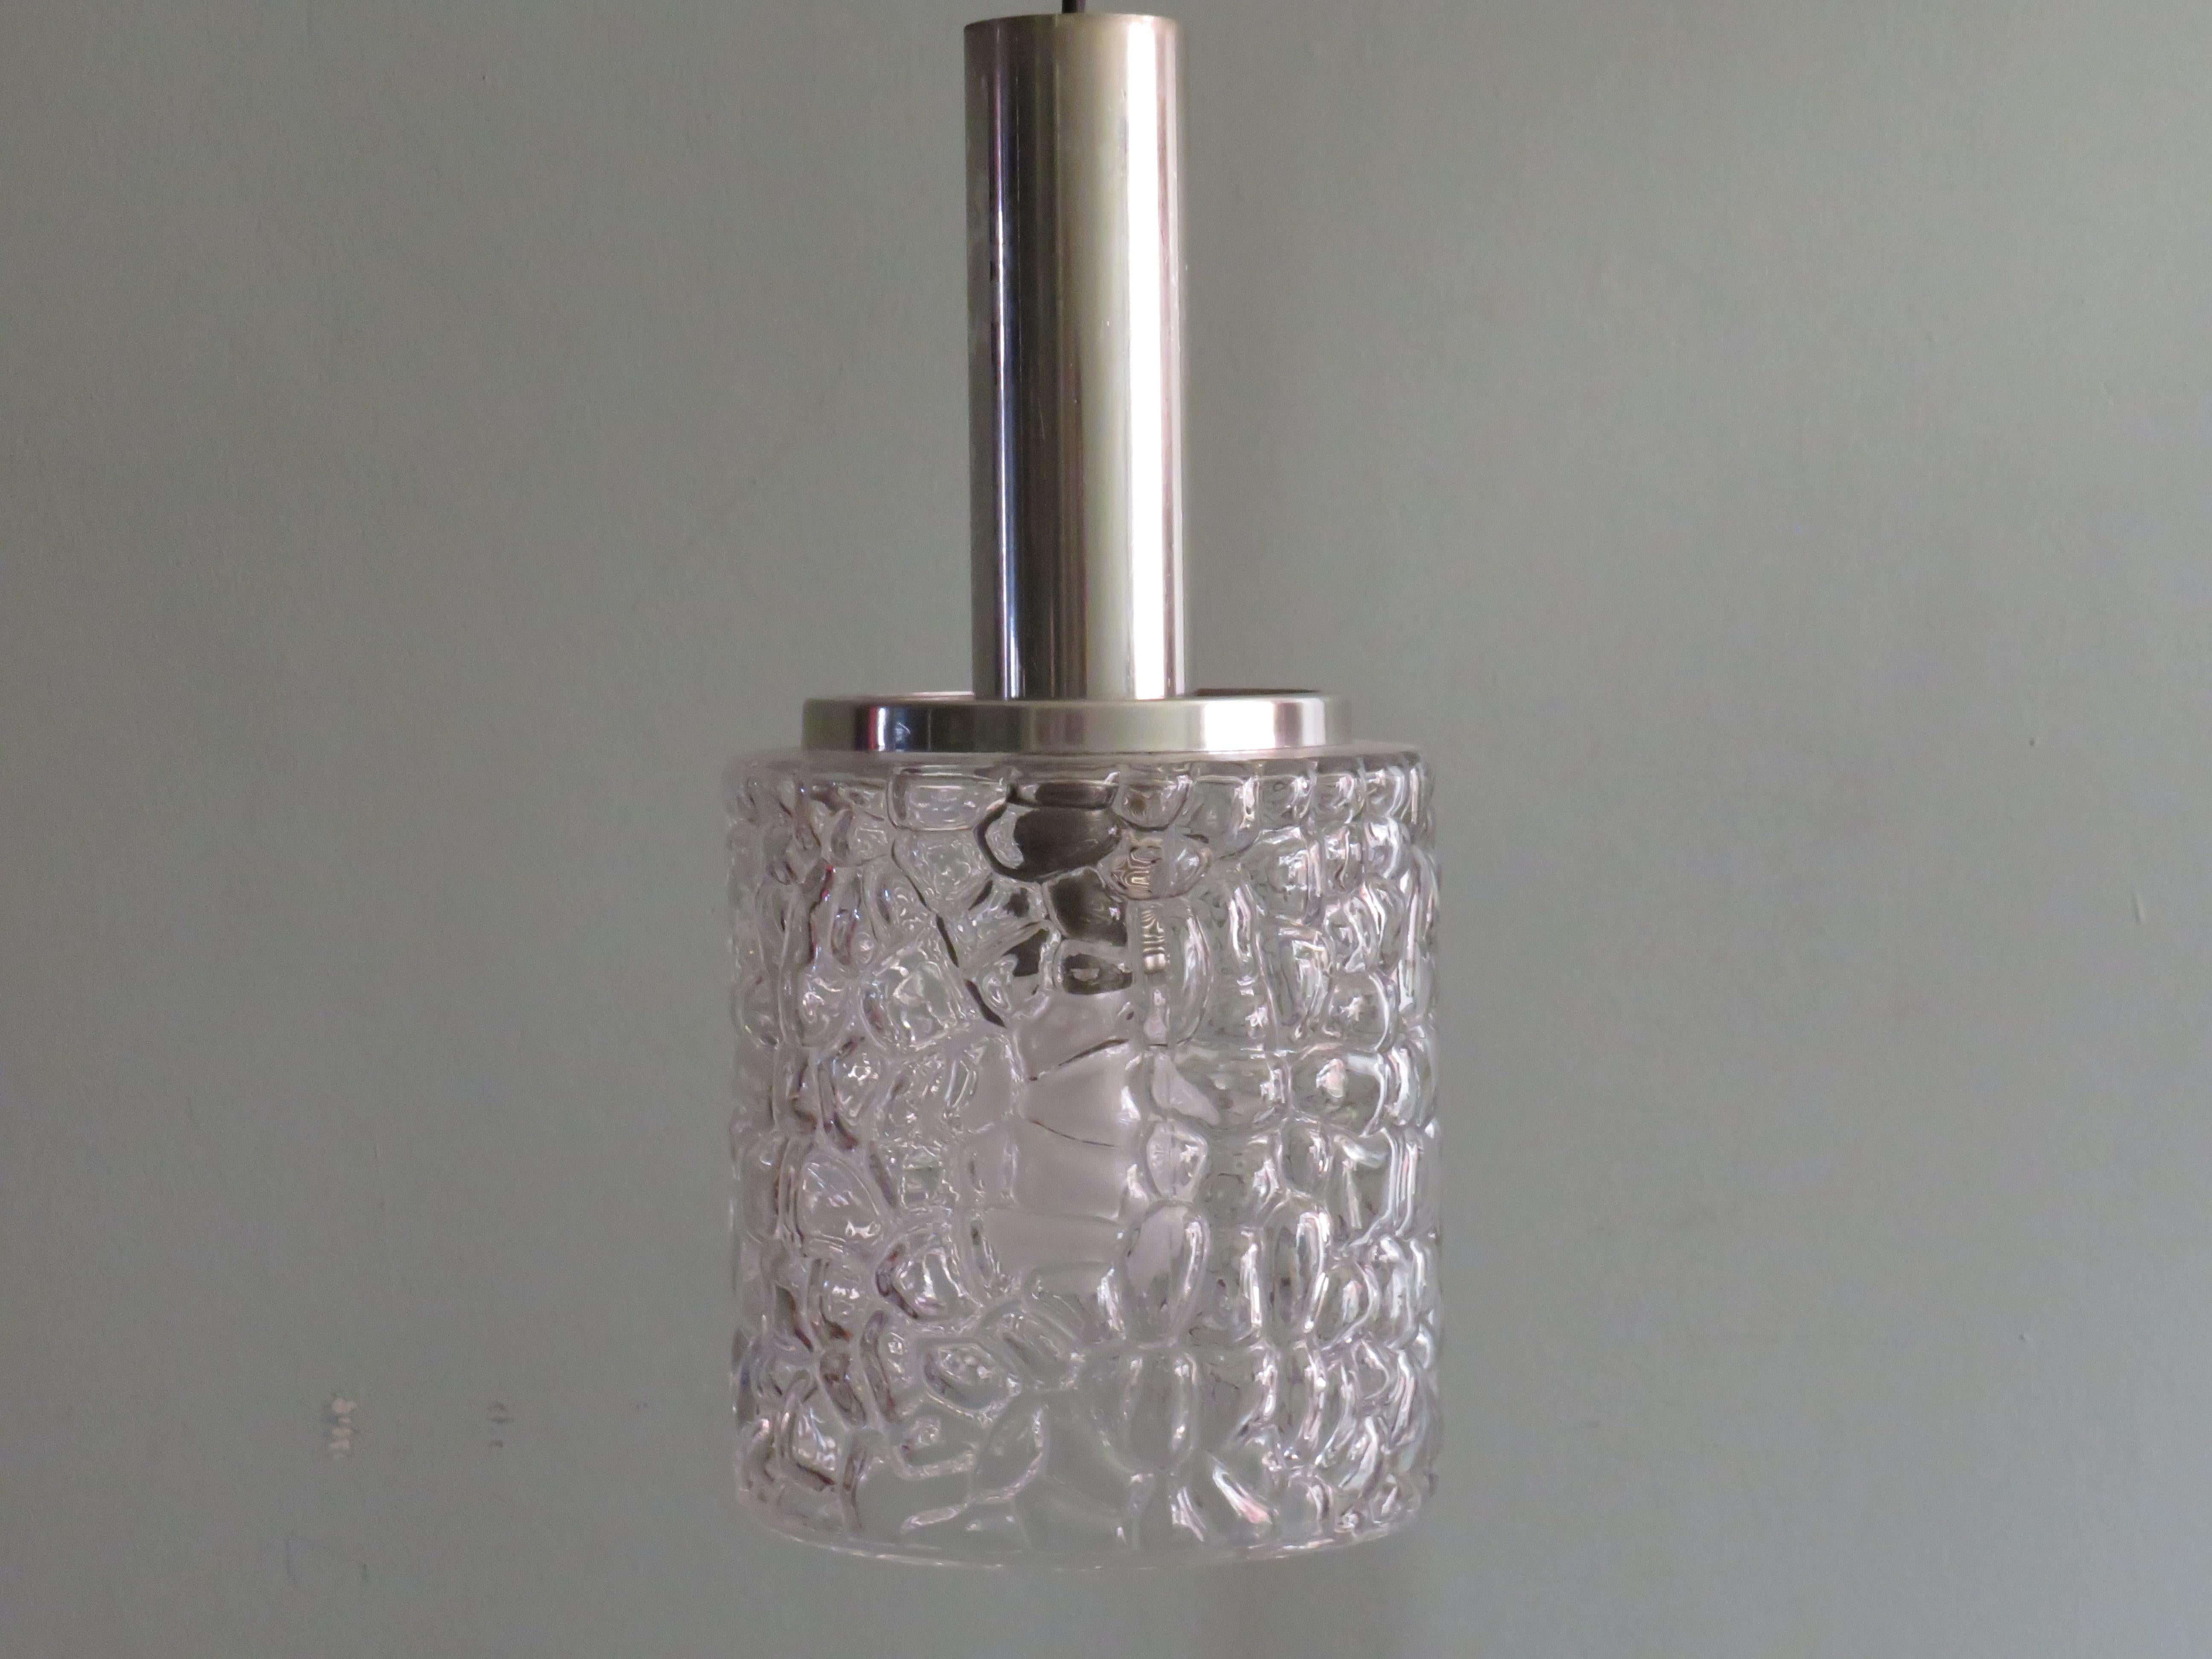 Belgian MCM Pendant, Relief Glass and Chrome, Belgium, 1960 For Sale